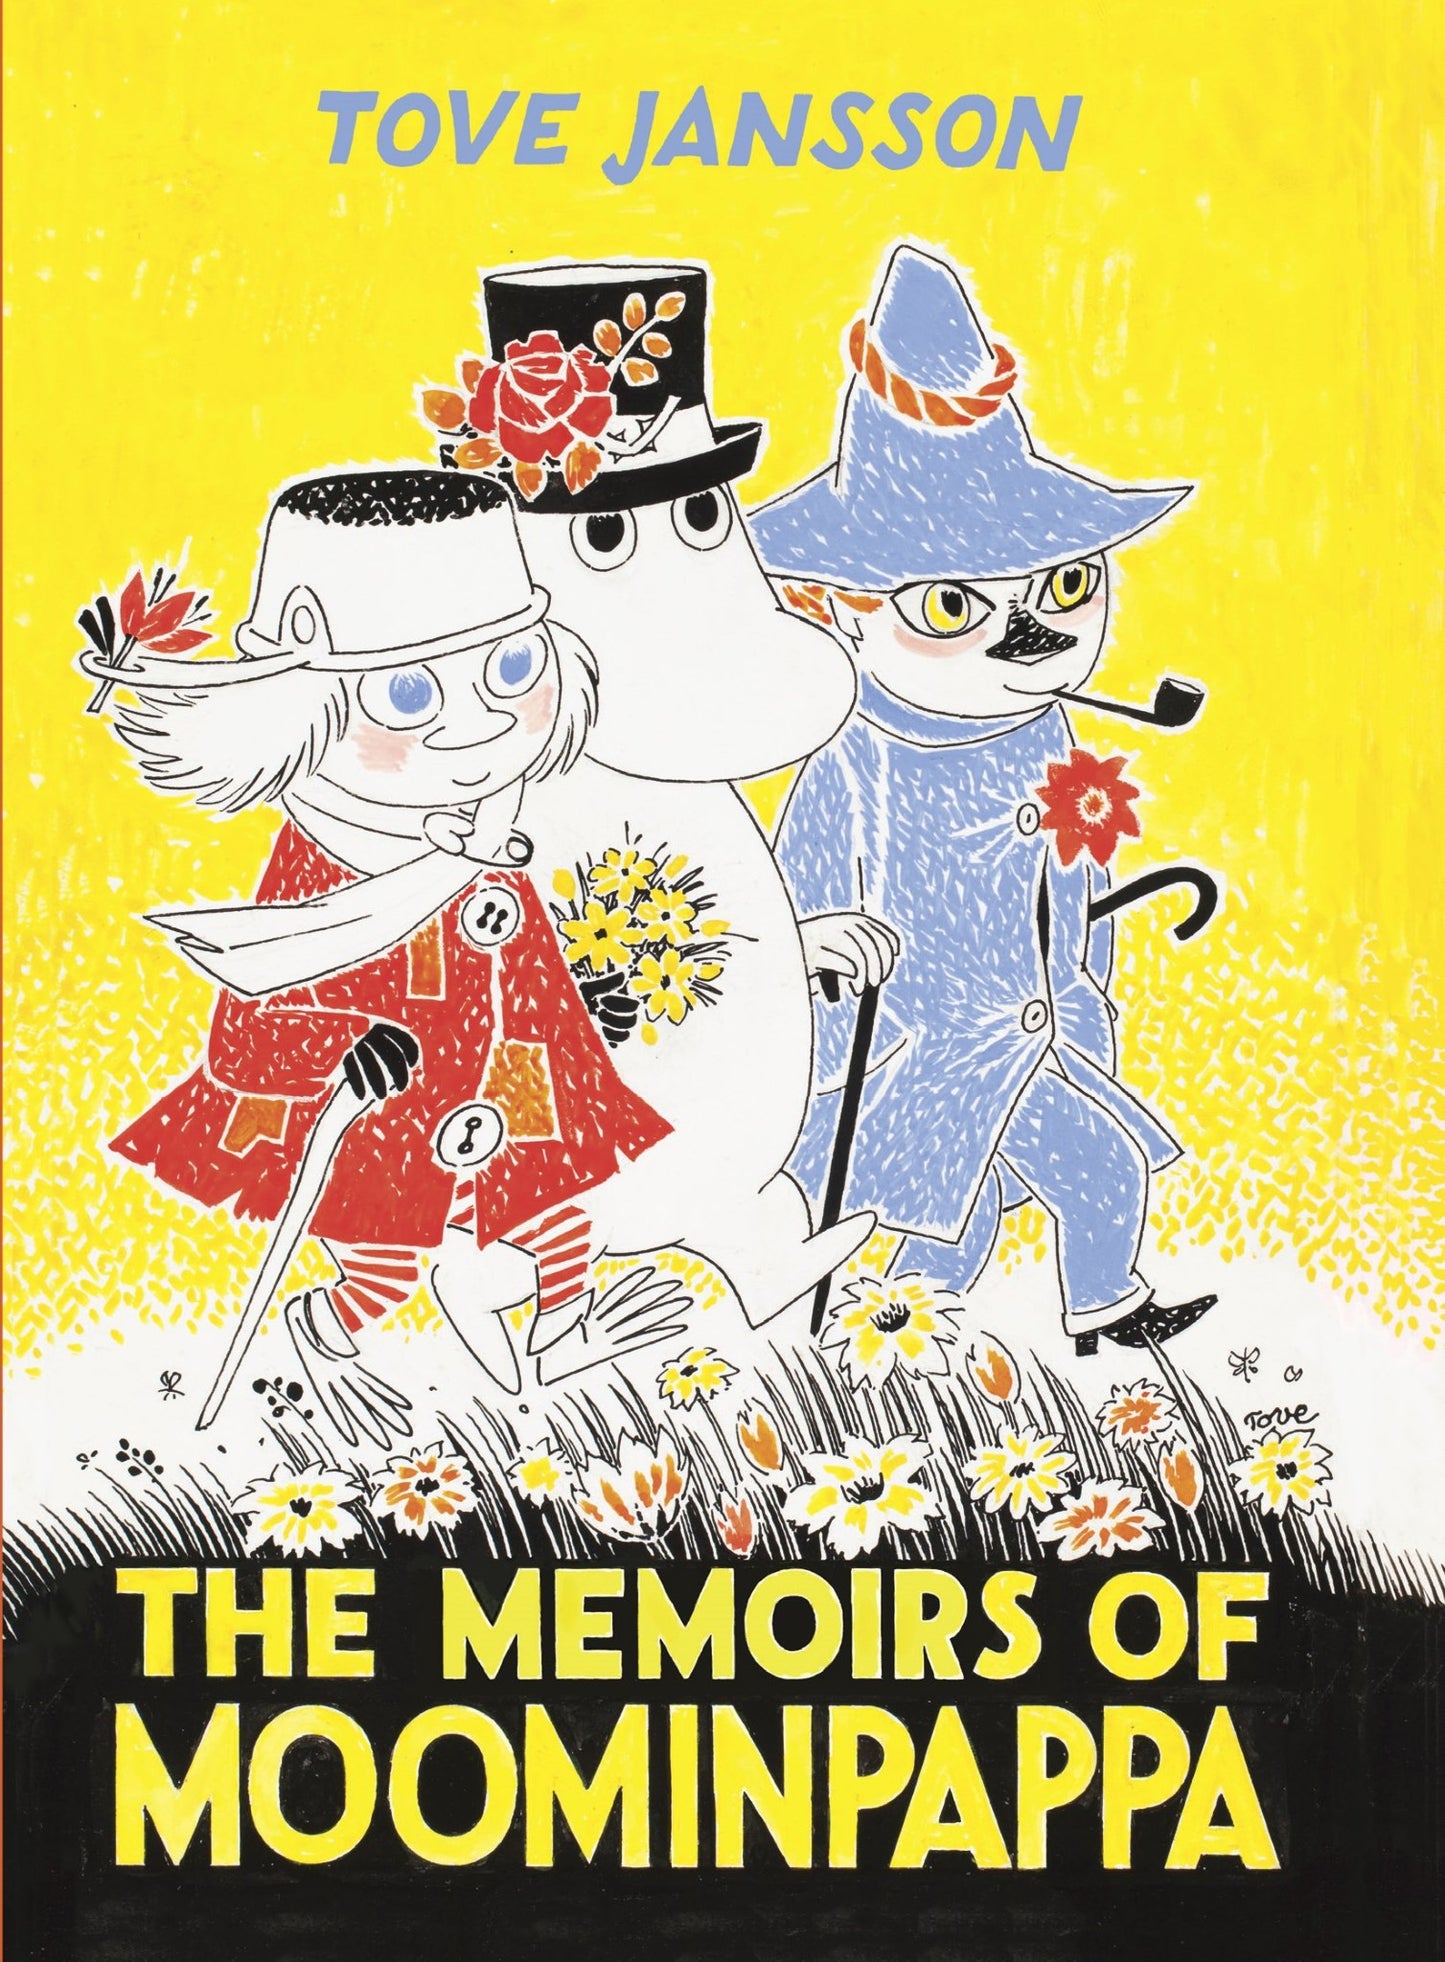 The Memoirs of Moominpappa - Tove Jansson Collectors Edition